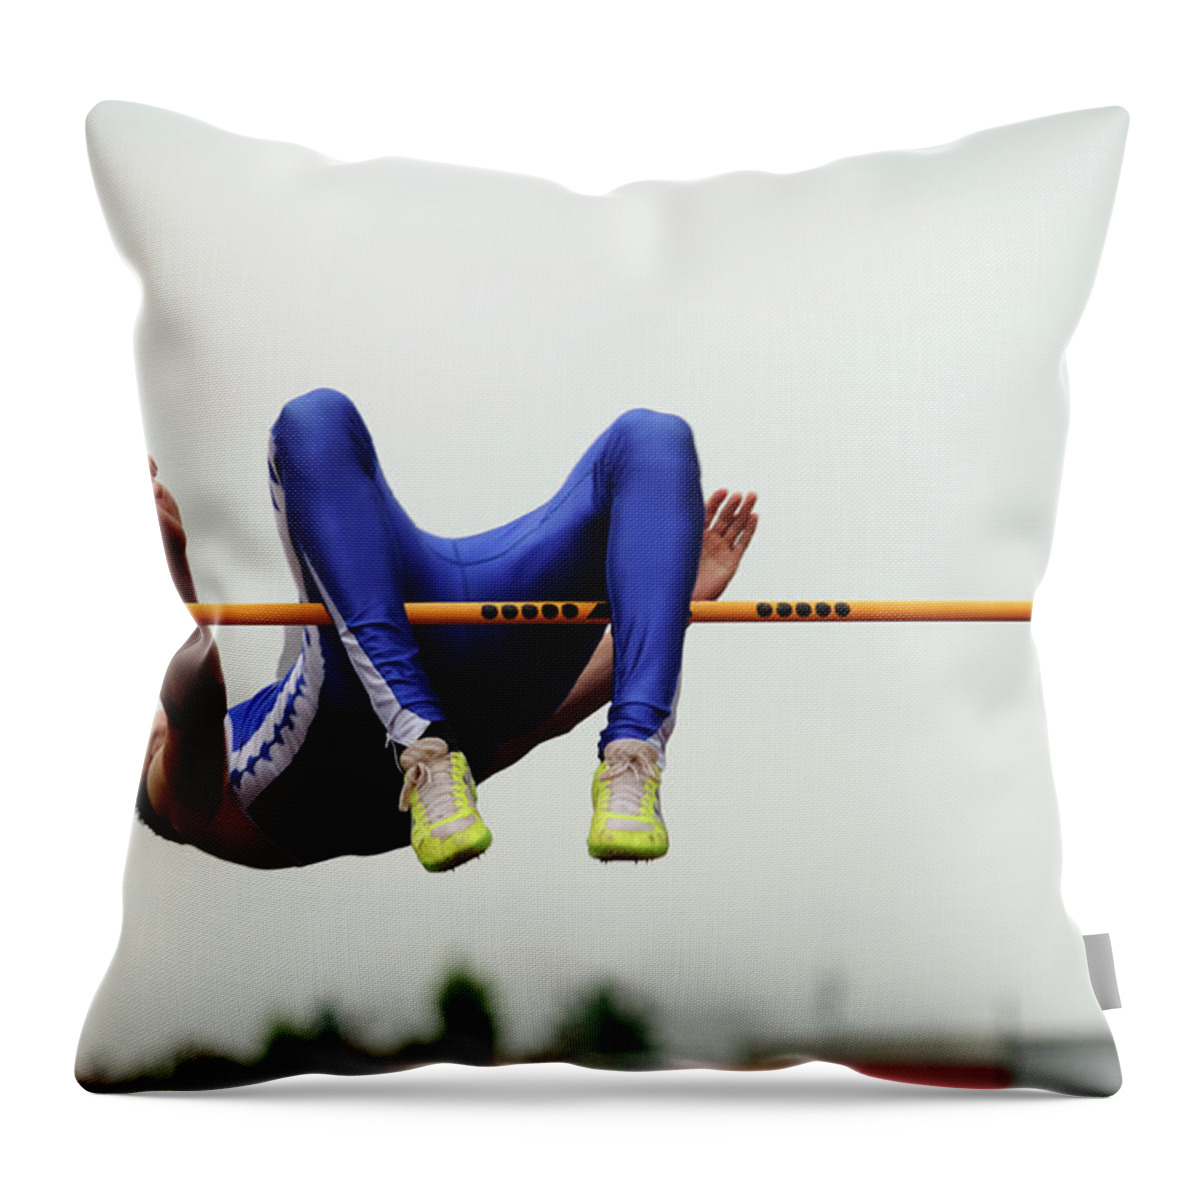 Event Throw Pillow featuring the photograph High Jump by Technotr